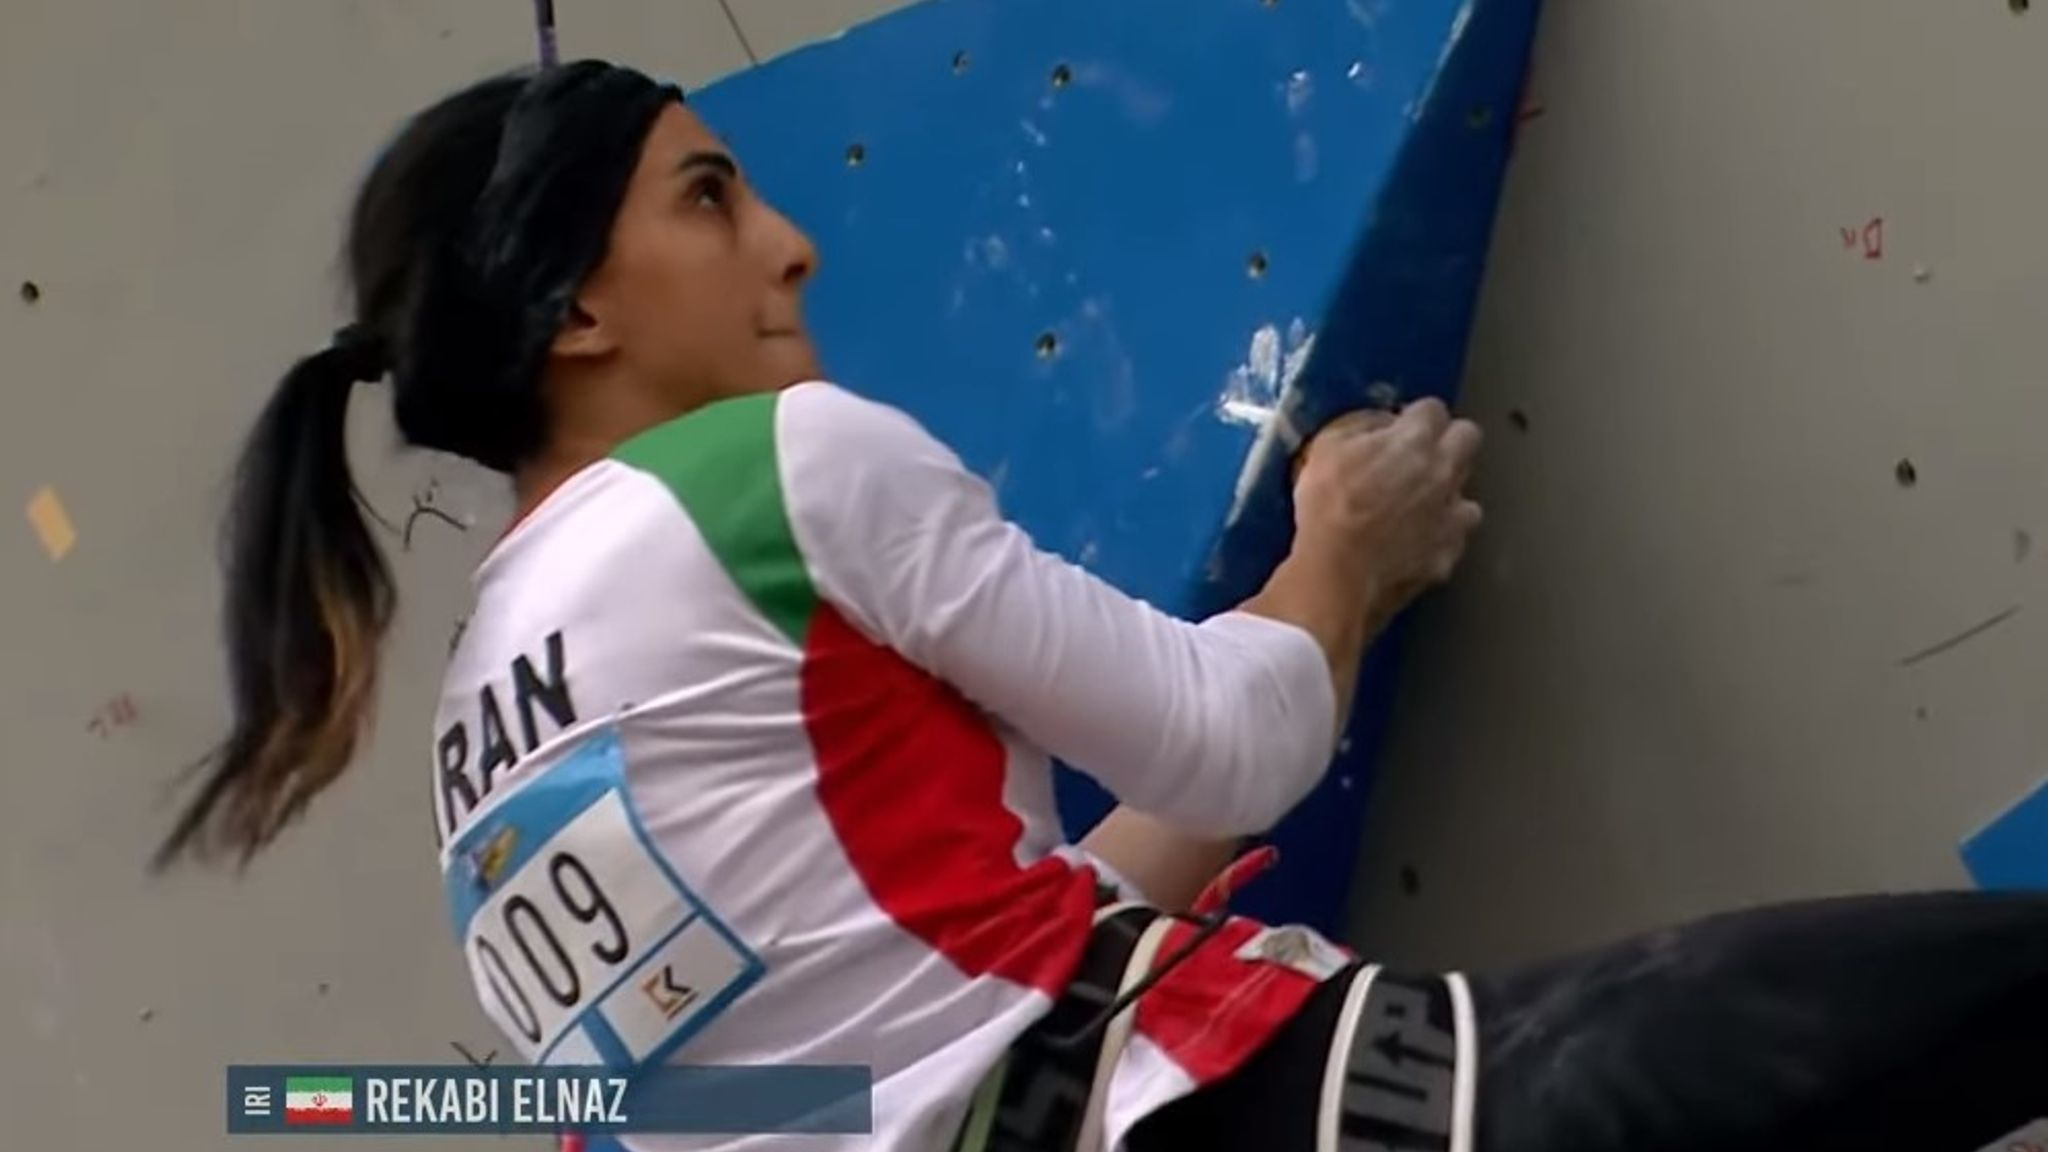 Iranian rock climber Rekabi will not be punished for not wearing a hijab at competitions